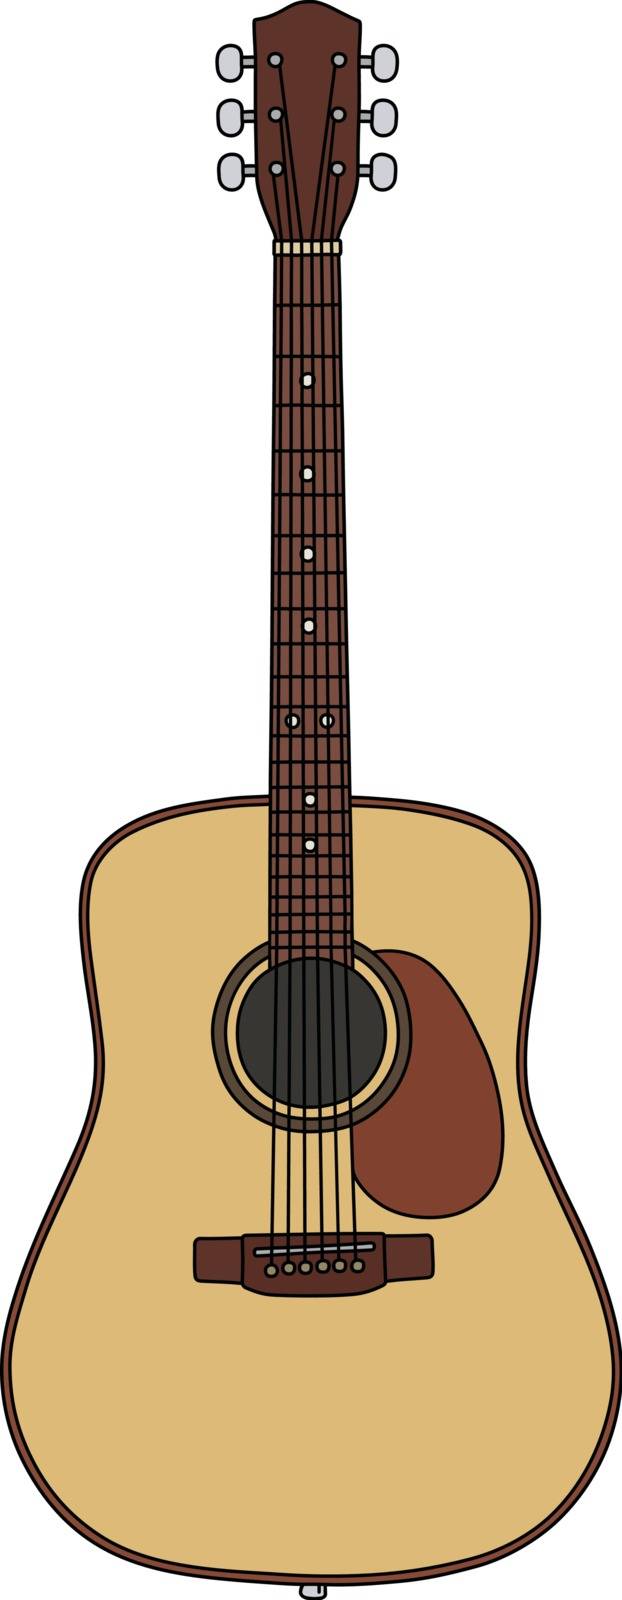 The vectorized hand drawing of a classic accoustic guitar